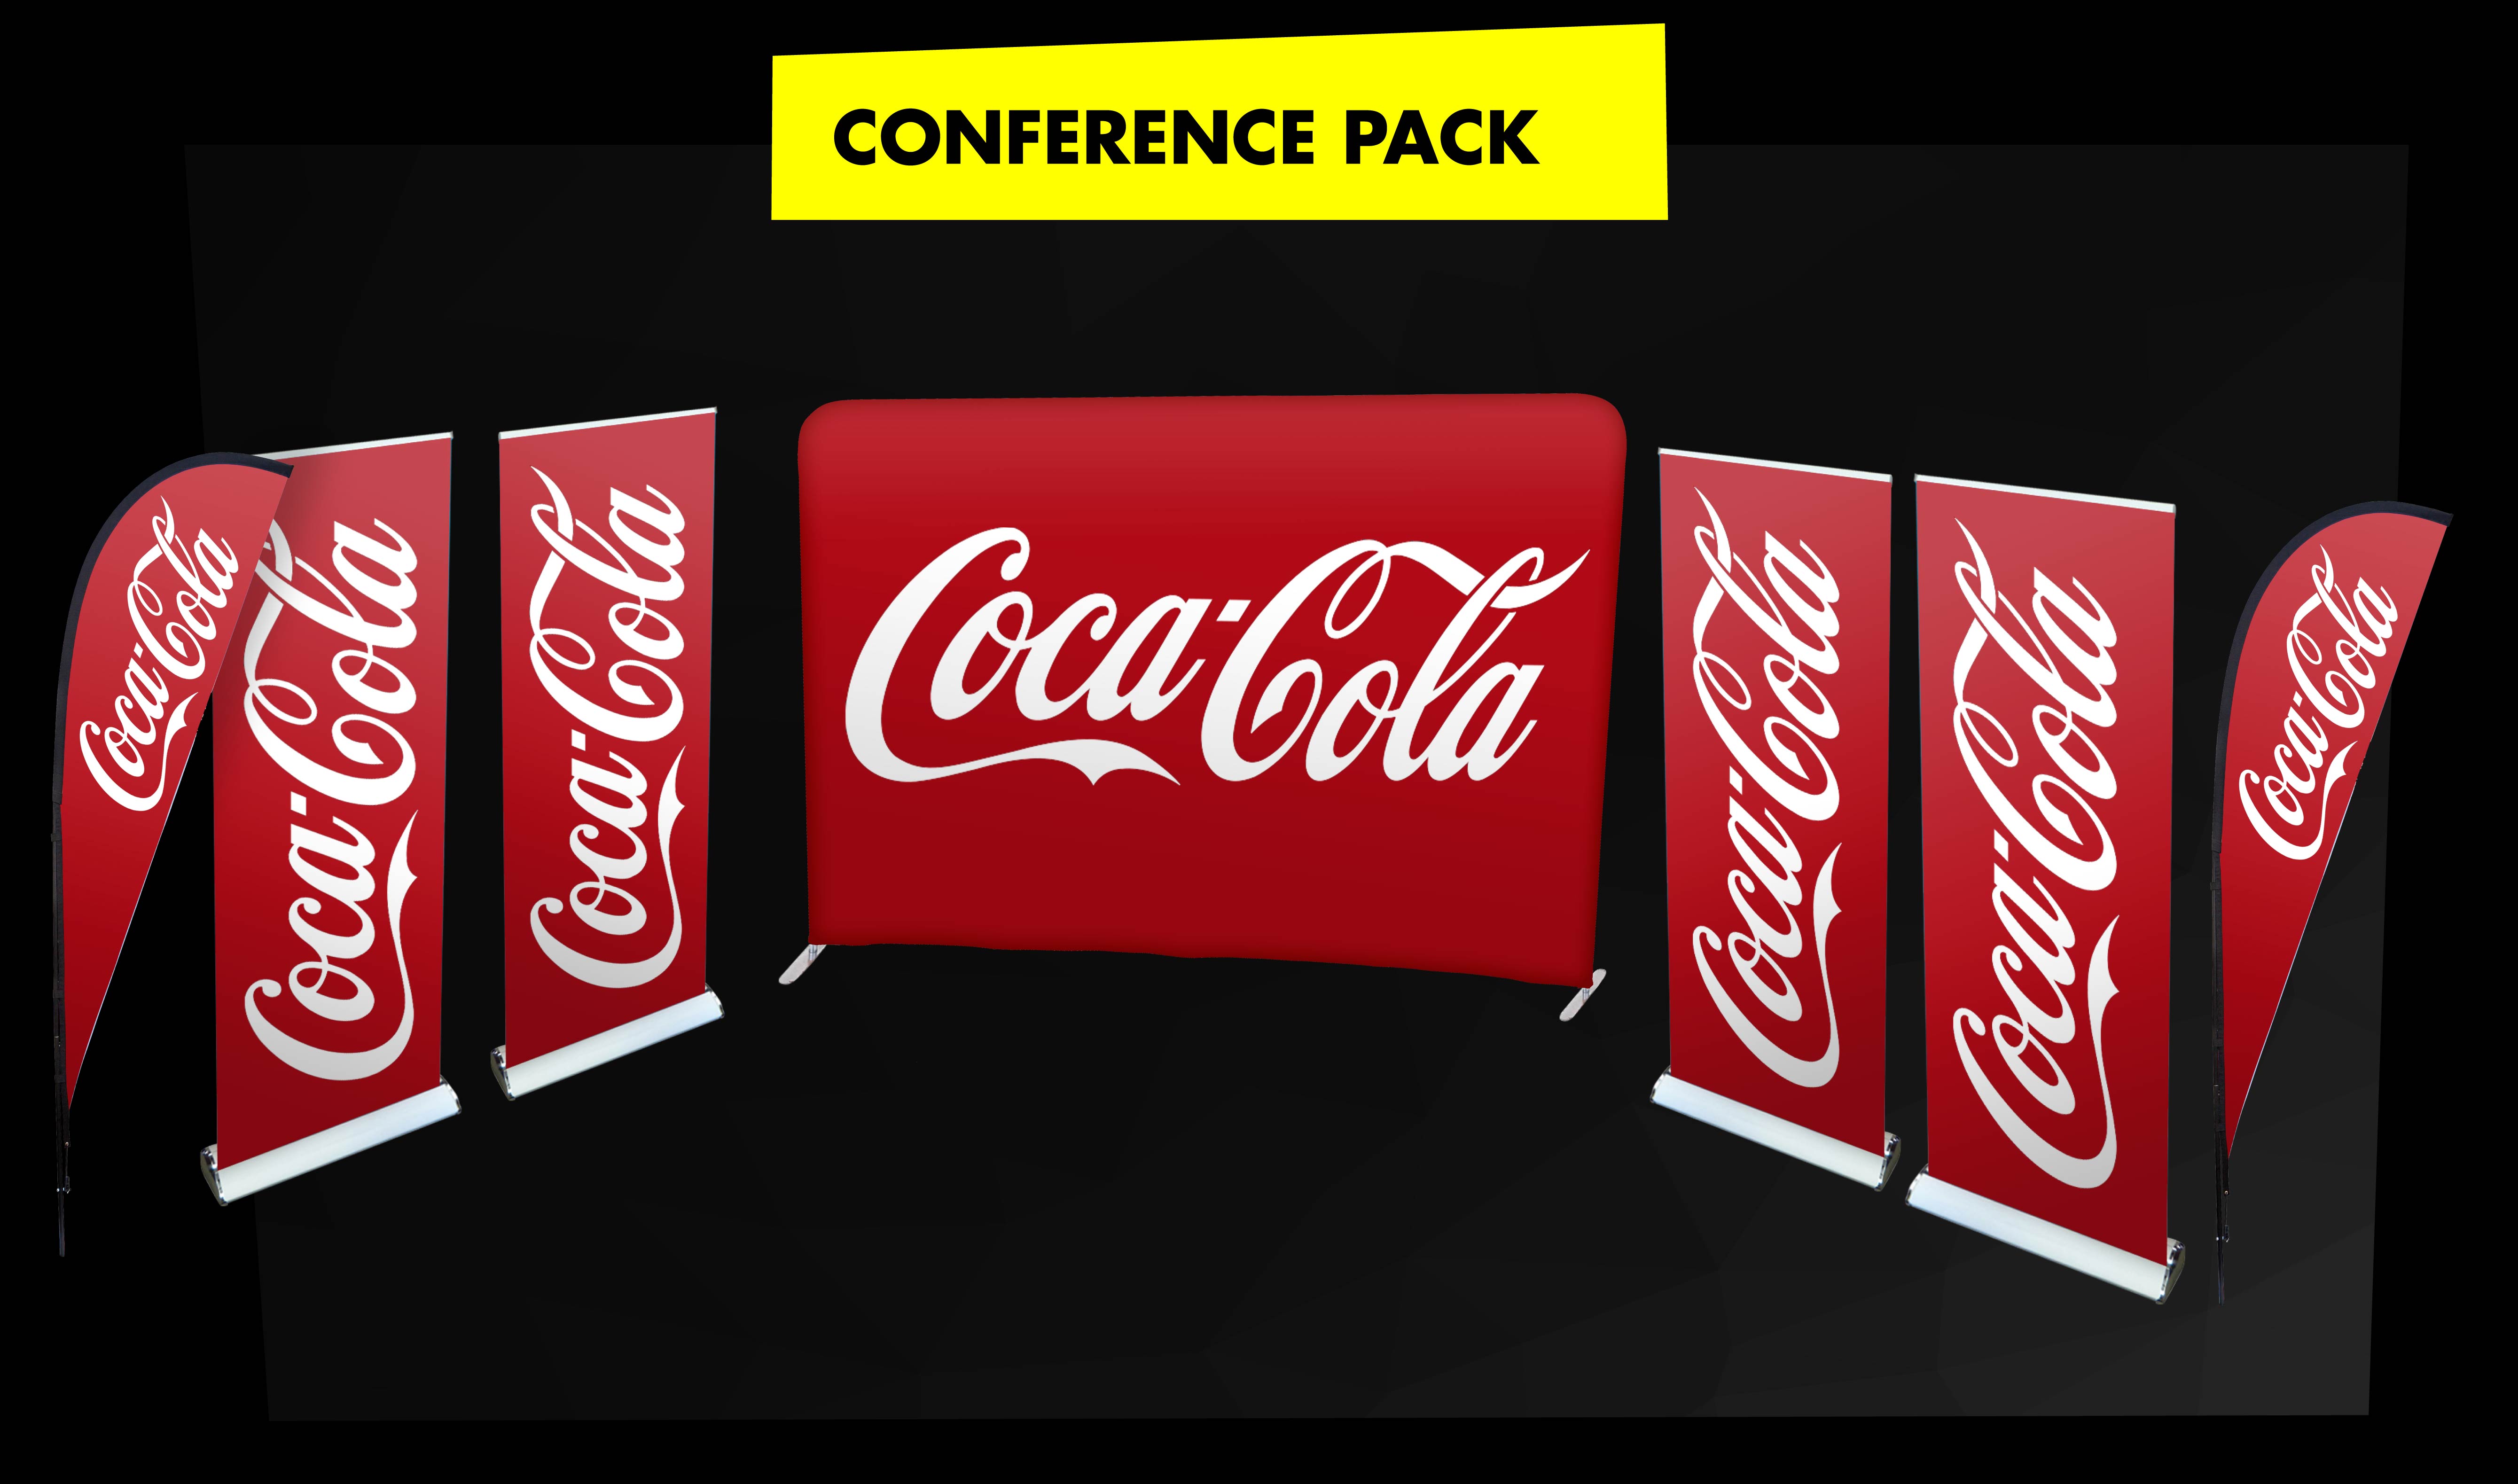 Conference Pack